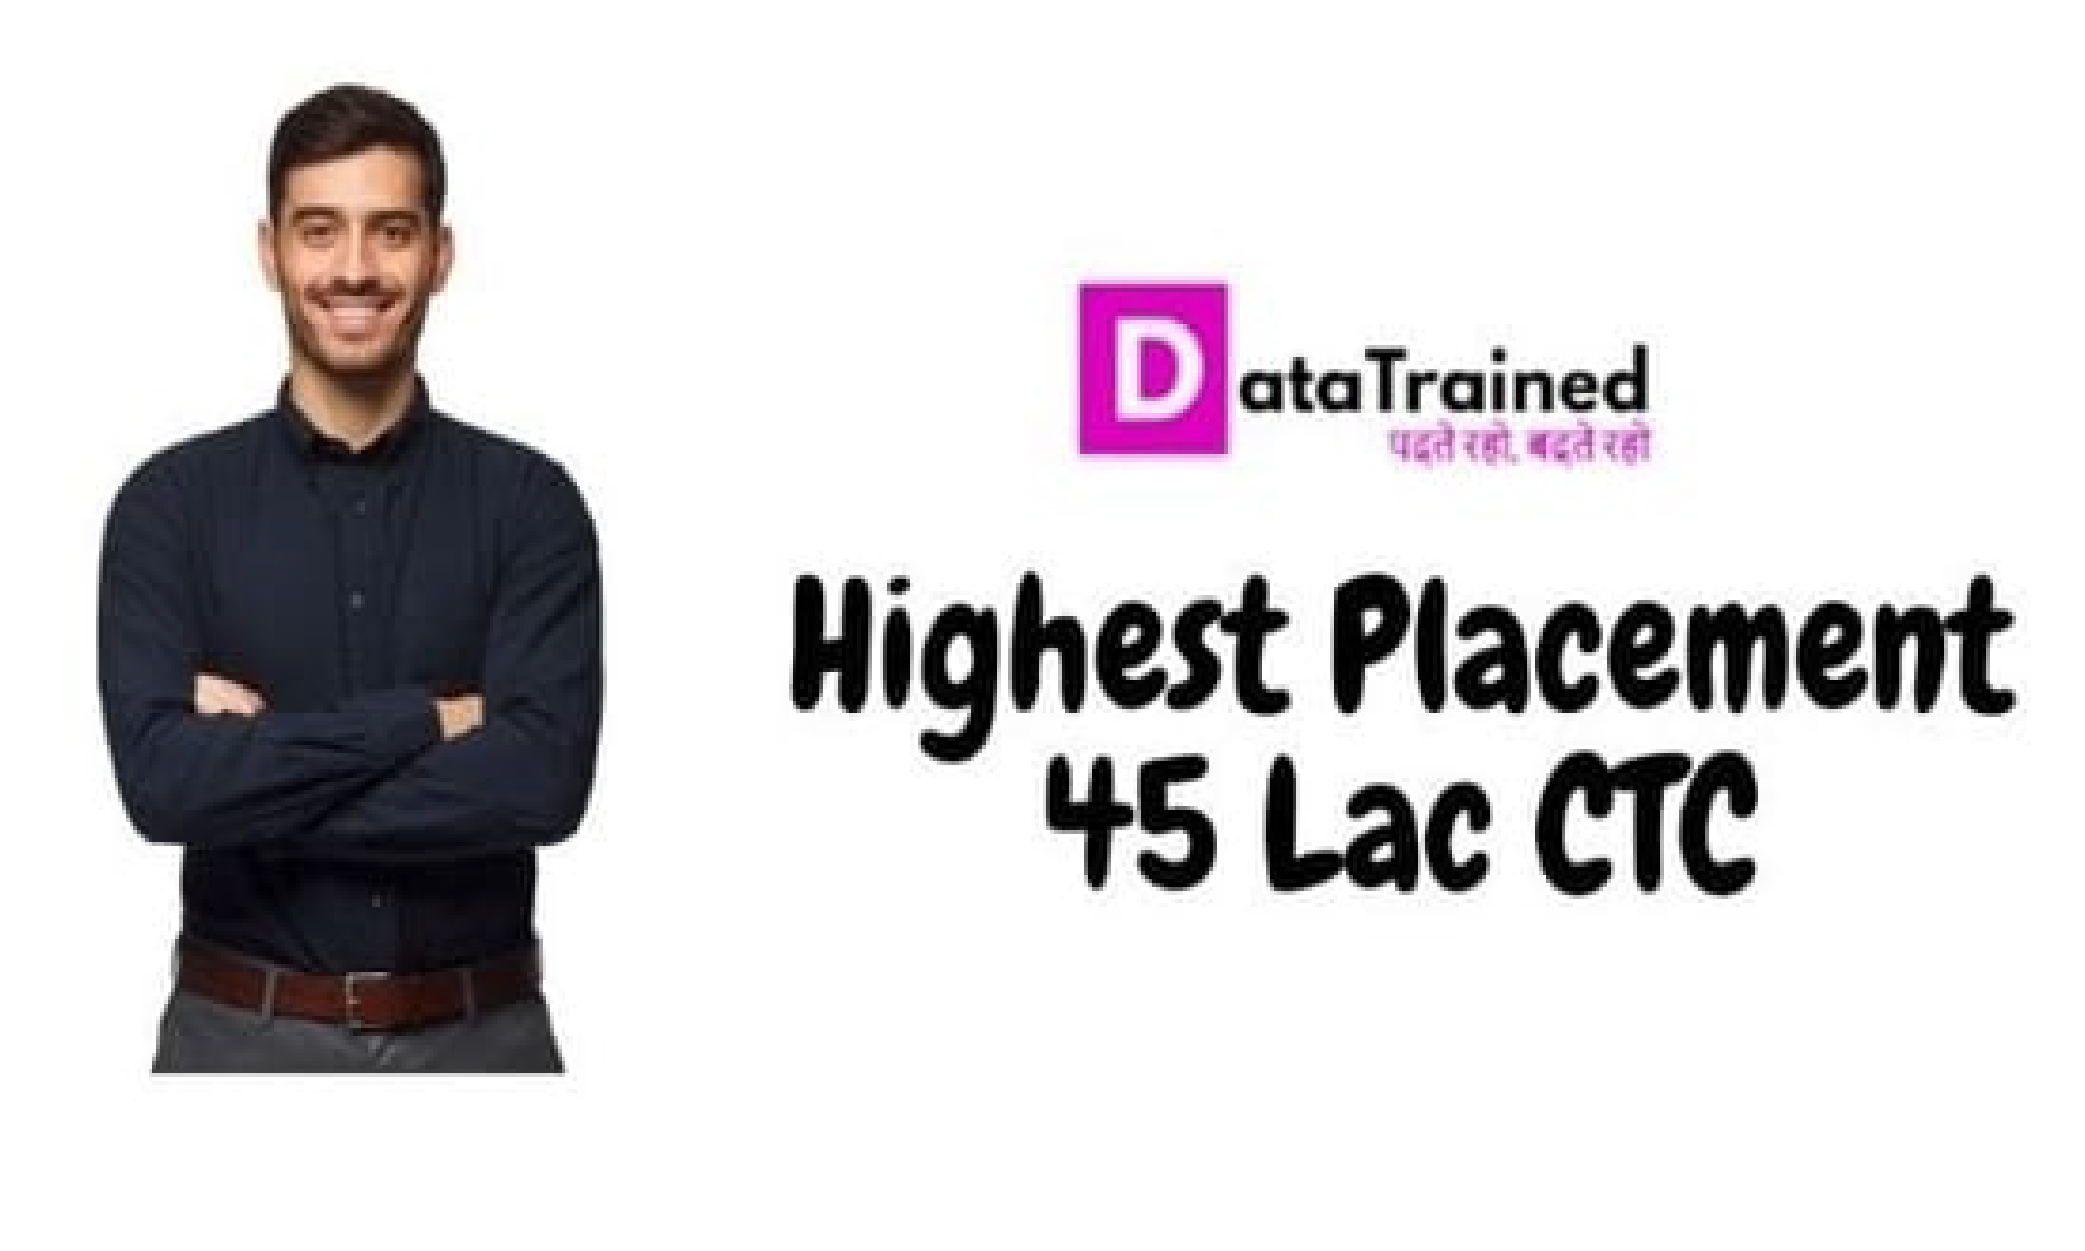 DataTrained Placement Review - Highest Package of 45 Lacs in Microsoft